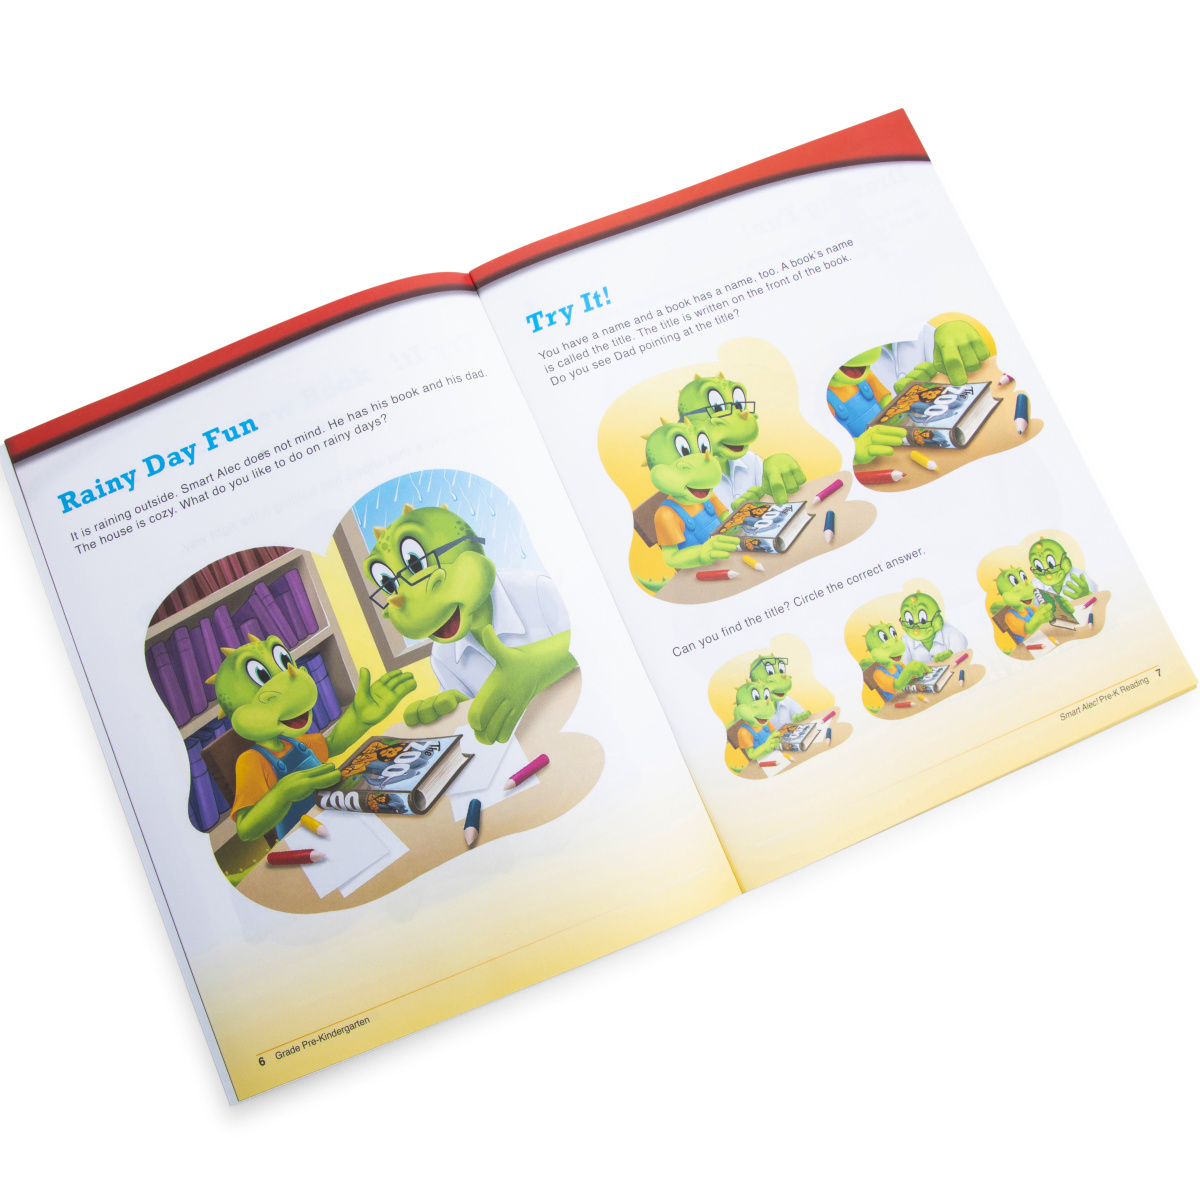 the smart alec reading readiness activity book